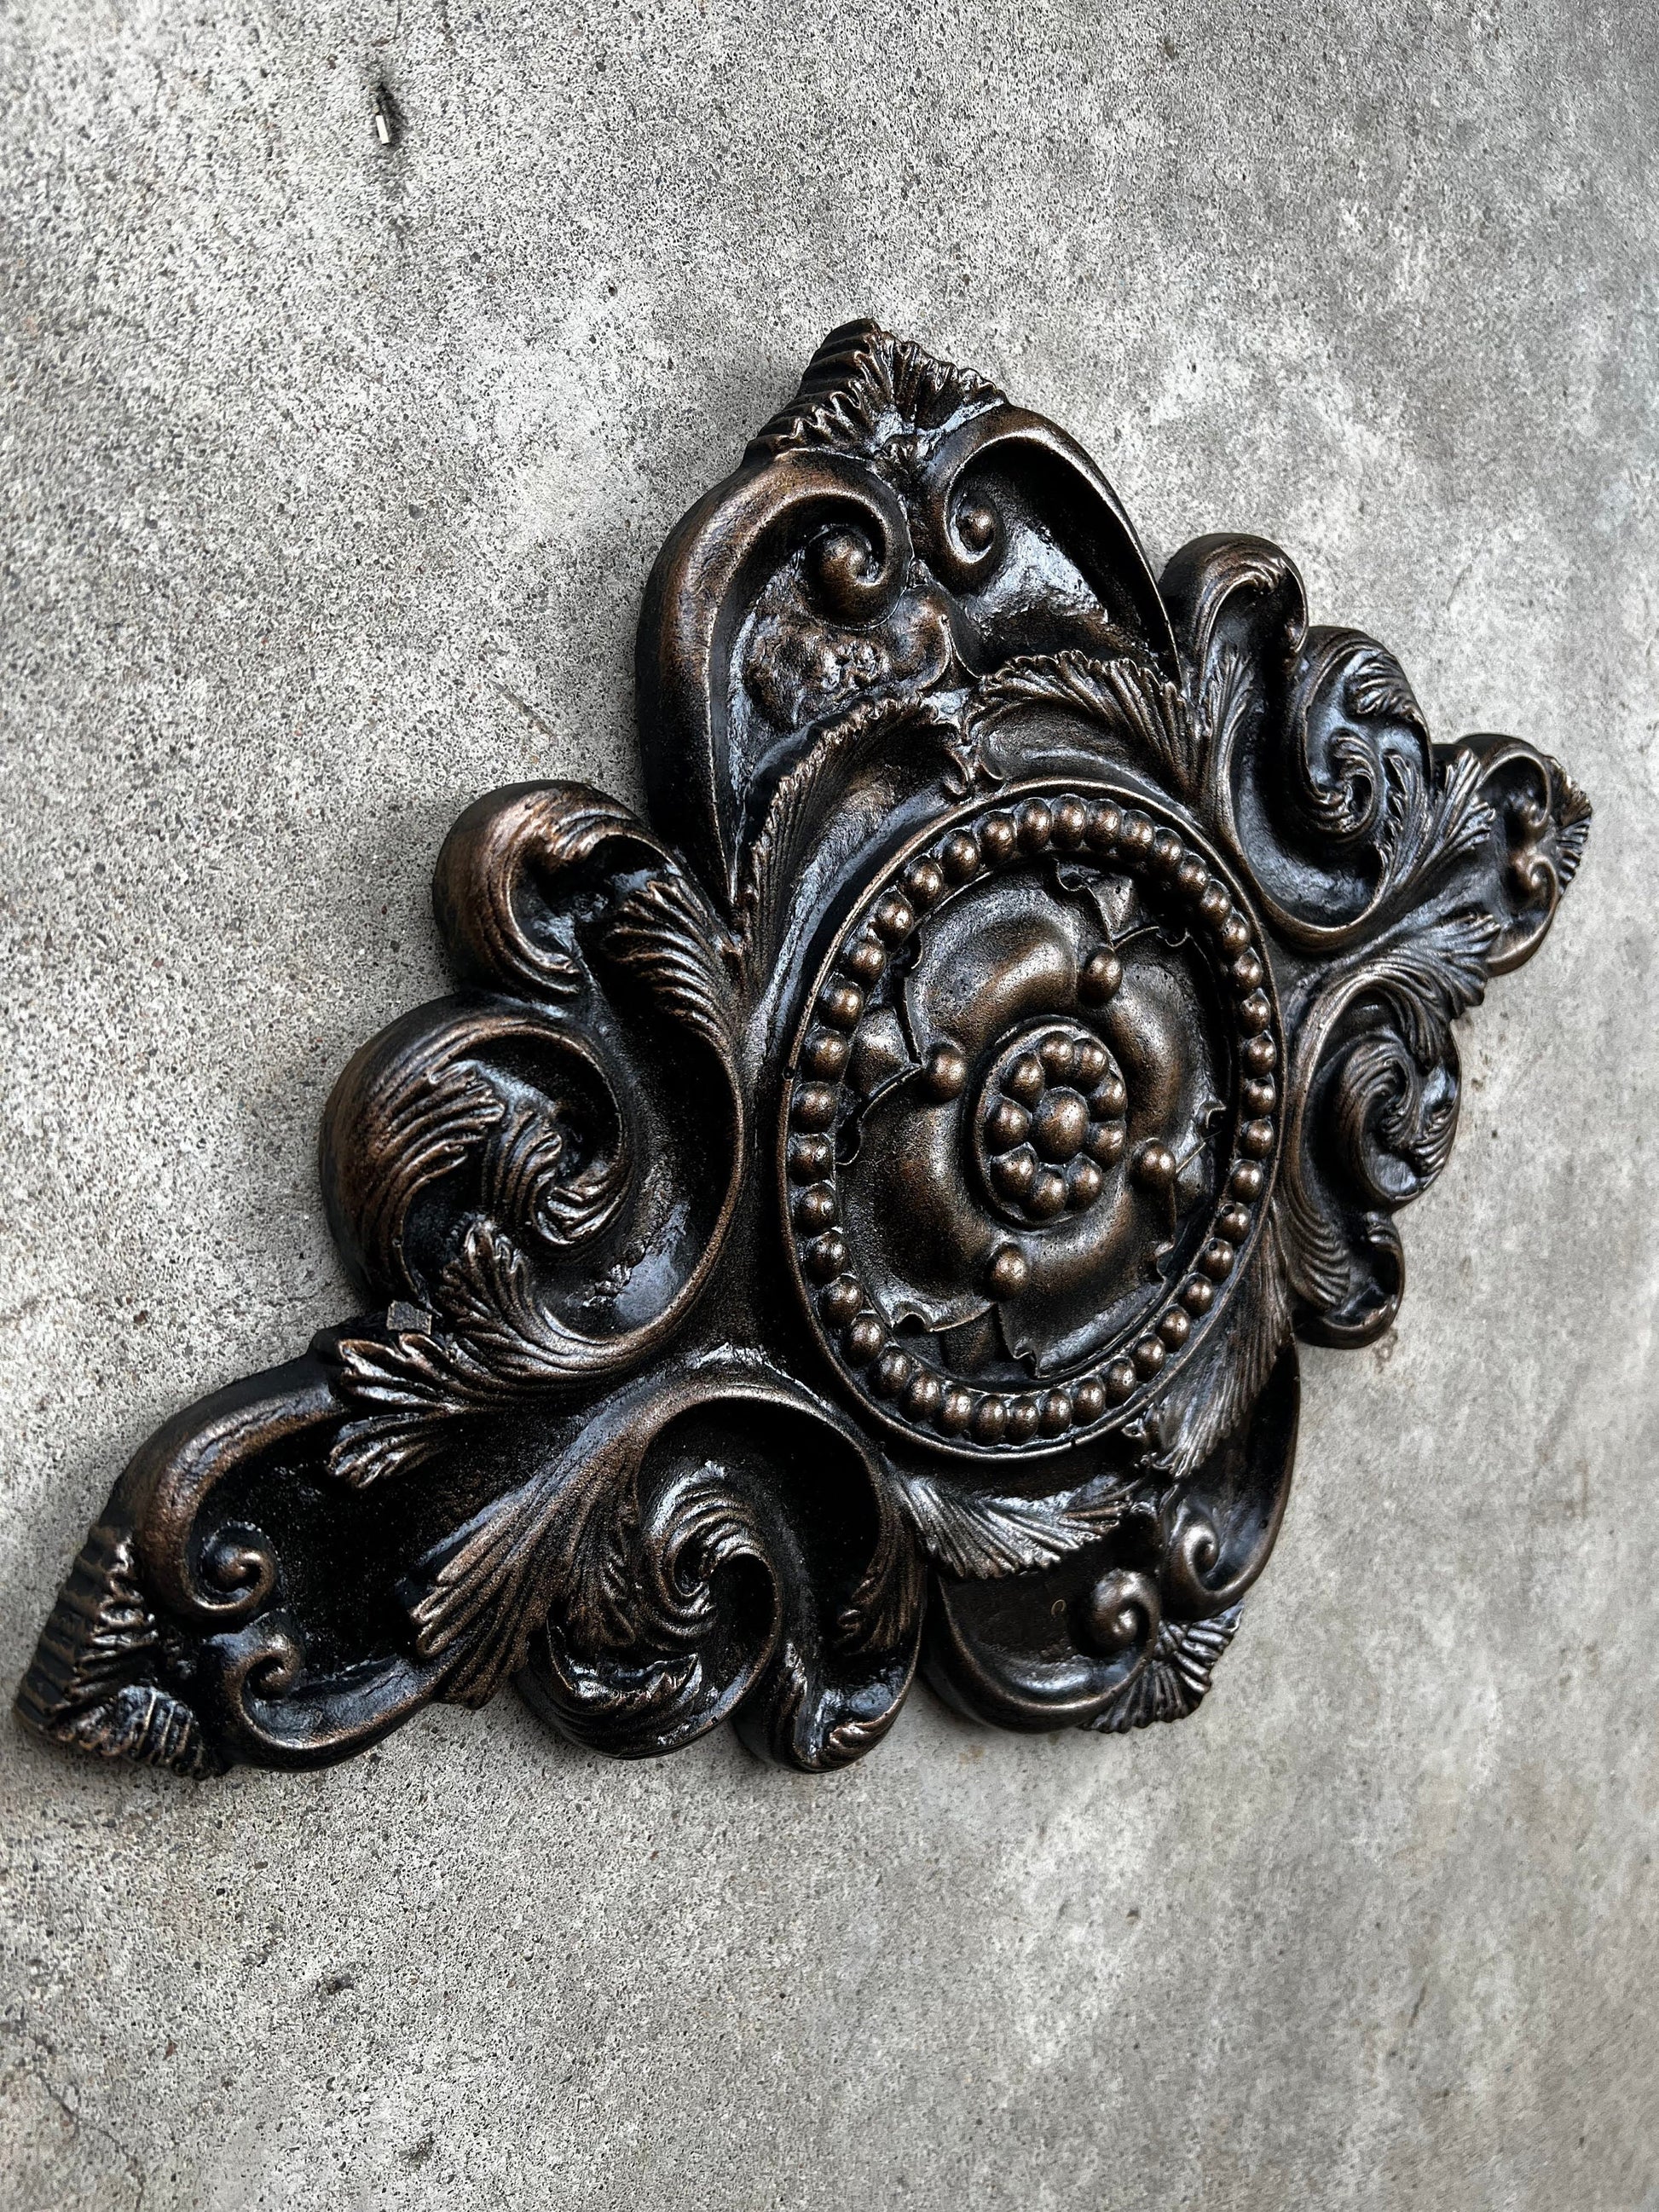 Architectural Wall Medallion | Wall Plaque | Plaster | Home Decor | PICK YOUR COLOR | FleurDeLisJunkie | French Country | Tuscan Wall Decor